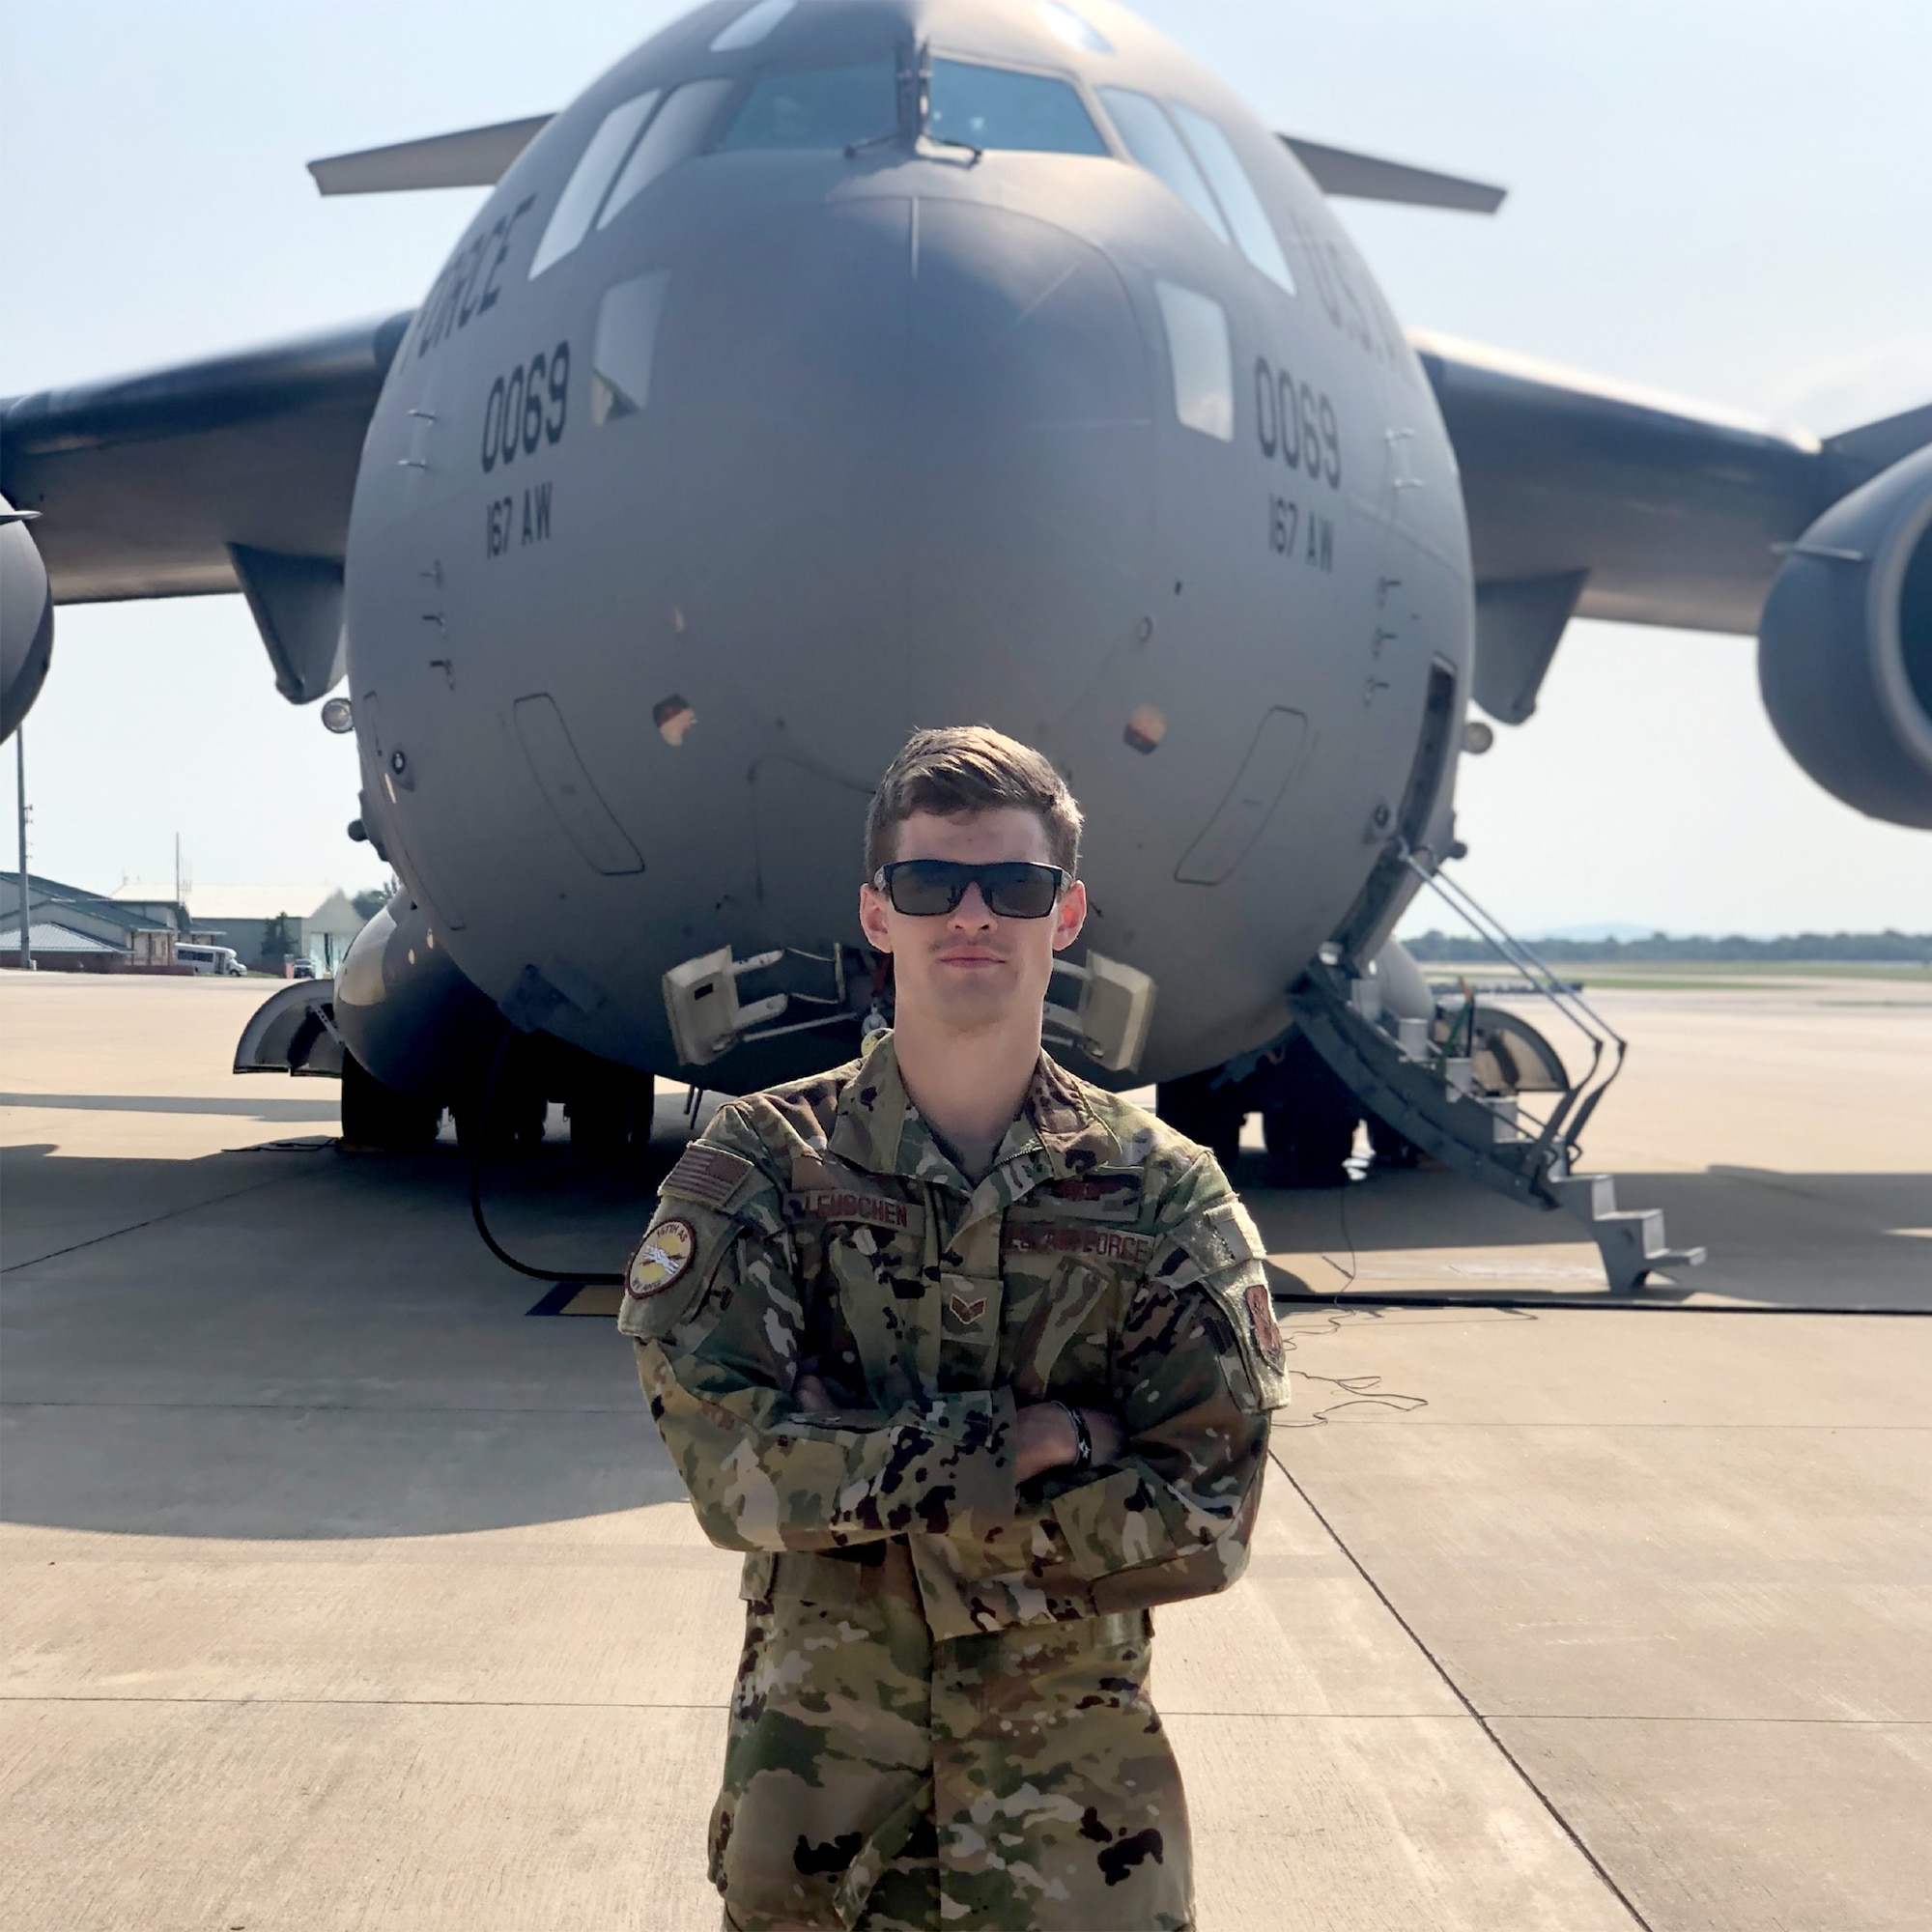 Staff Sgt. Kyle Leuschen a loadmaster for the 167th Airlift Squadron, stands in front of a C-17 Globemaster III aircraft.